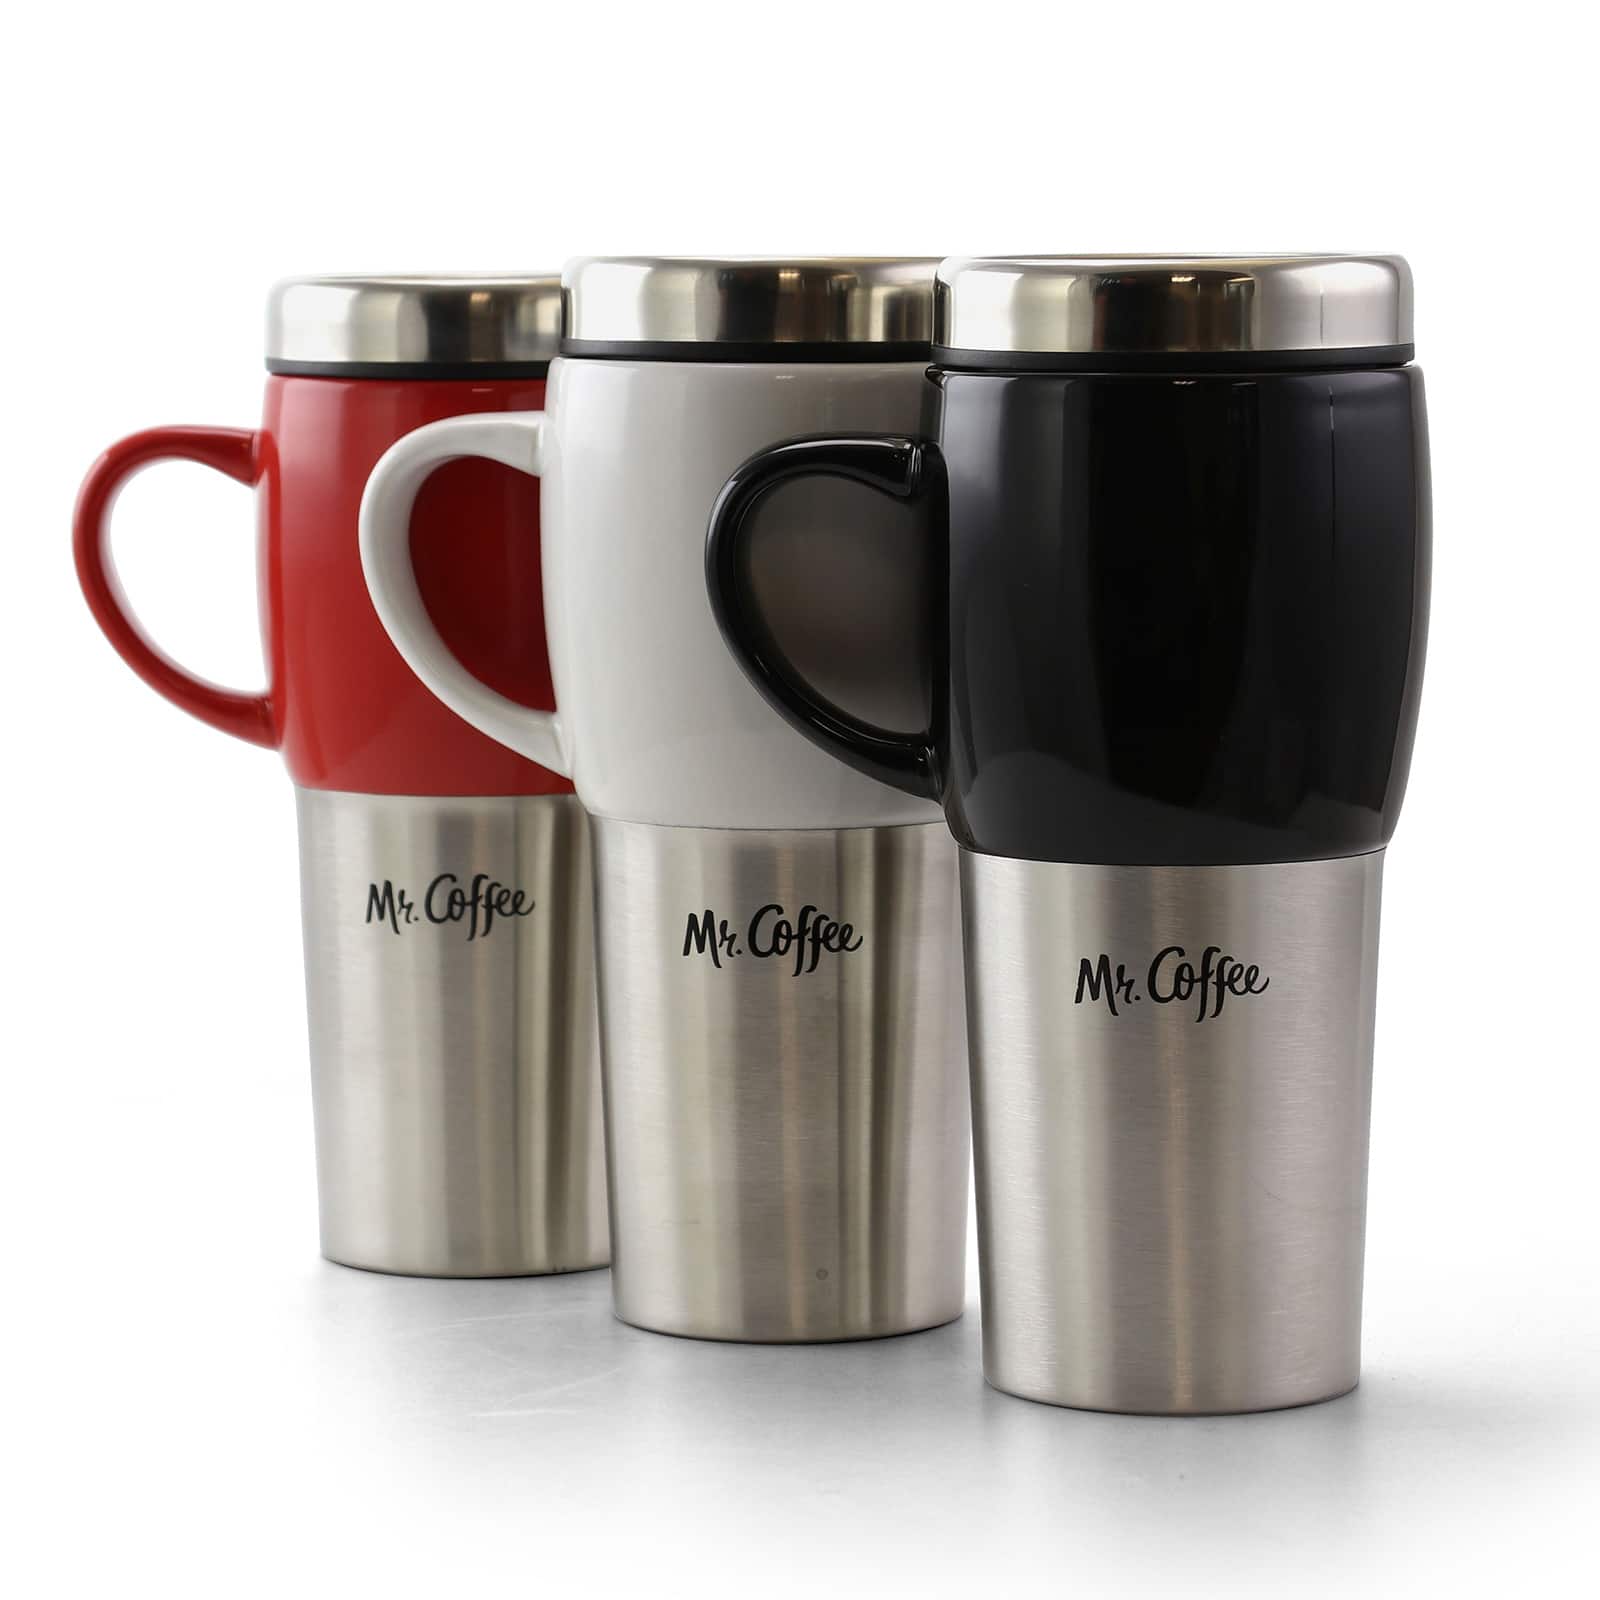 Mr. Coffee Luster Javelin 16 Ounce Stainless Steel Thermal Travel Bottle in Assorted Colors Set of 4